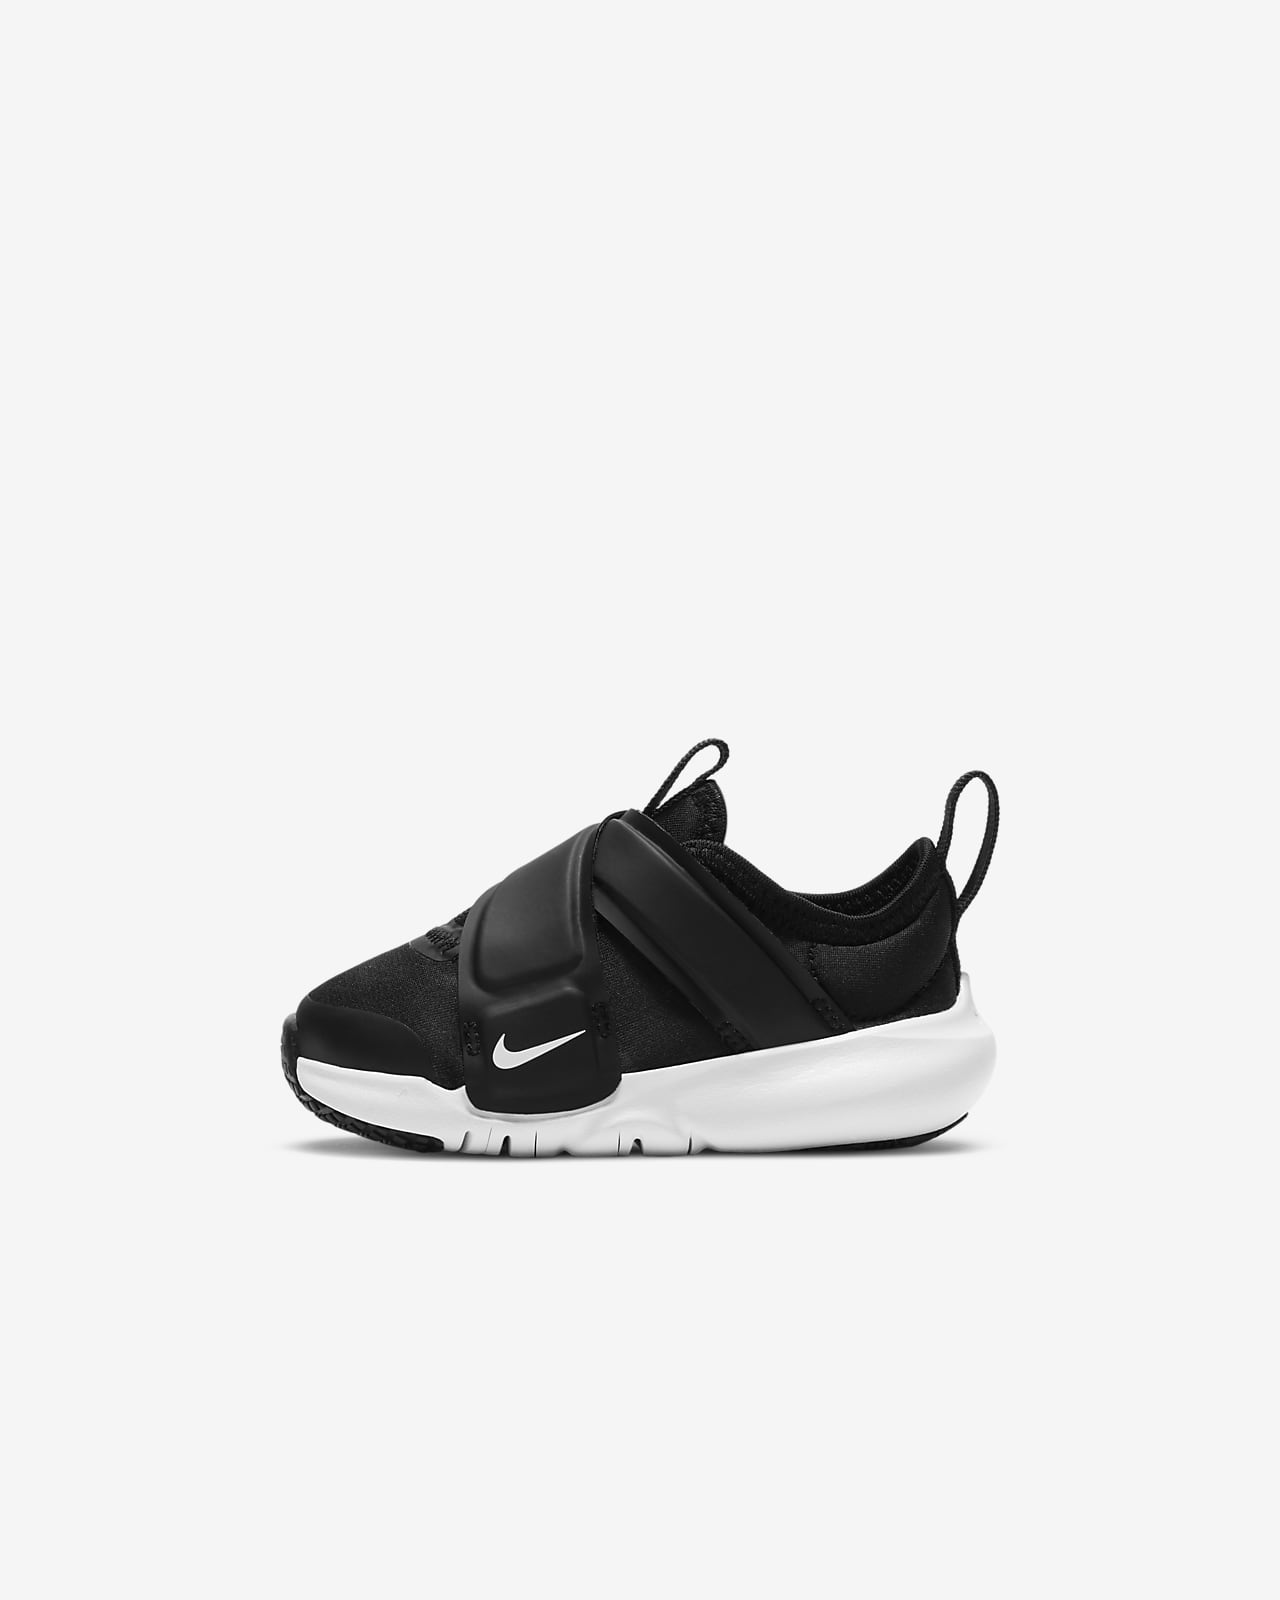 so Lily chant Nike Flex Advance Baby/Toddler Shoes. Nike HR